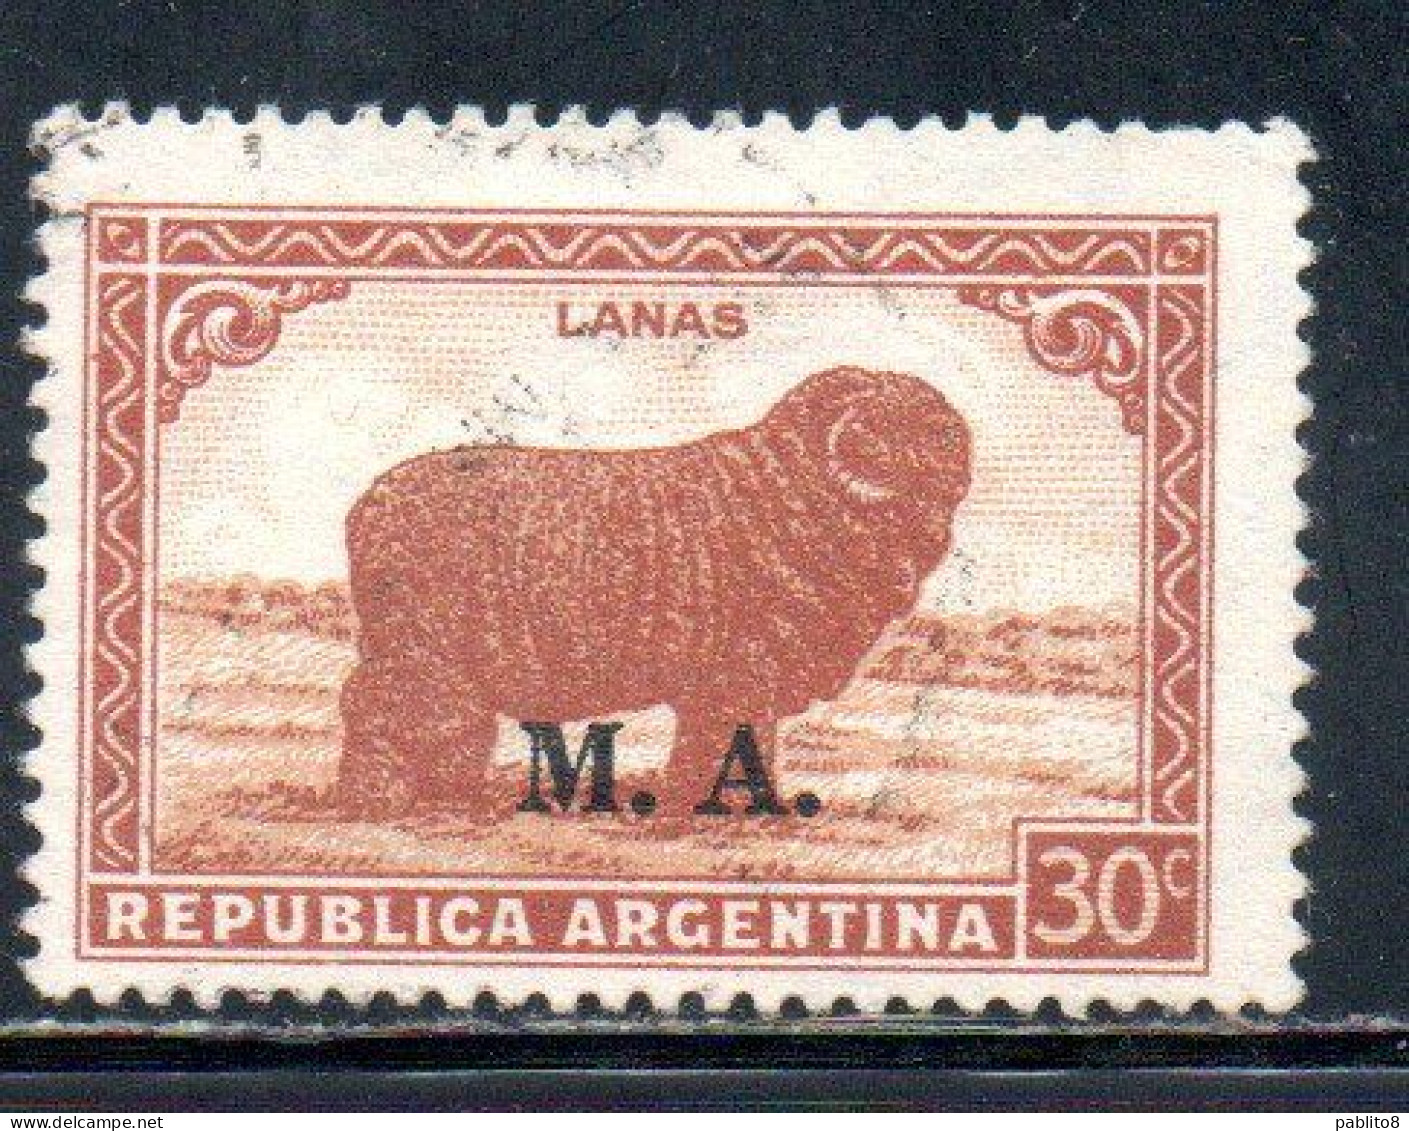 ARGENTINA 1935 1937 OFFICIAL DEPARTMENT STAMP OVERPRINTED M.A. MINISTRY OF AGRICULTURE MA 30c USED USADO - Officials